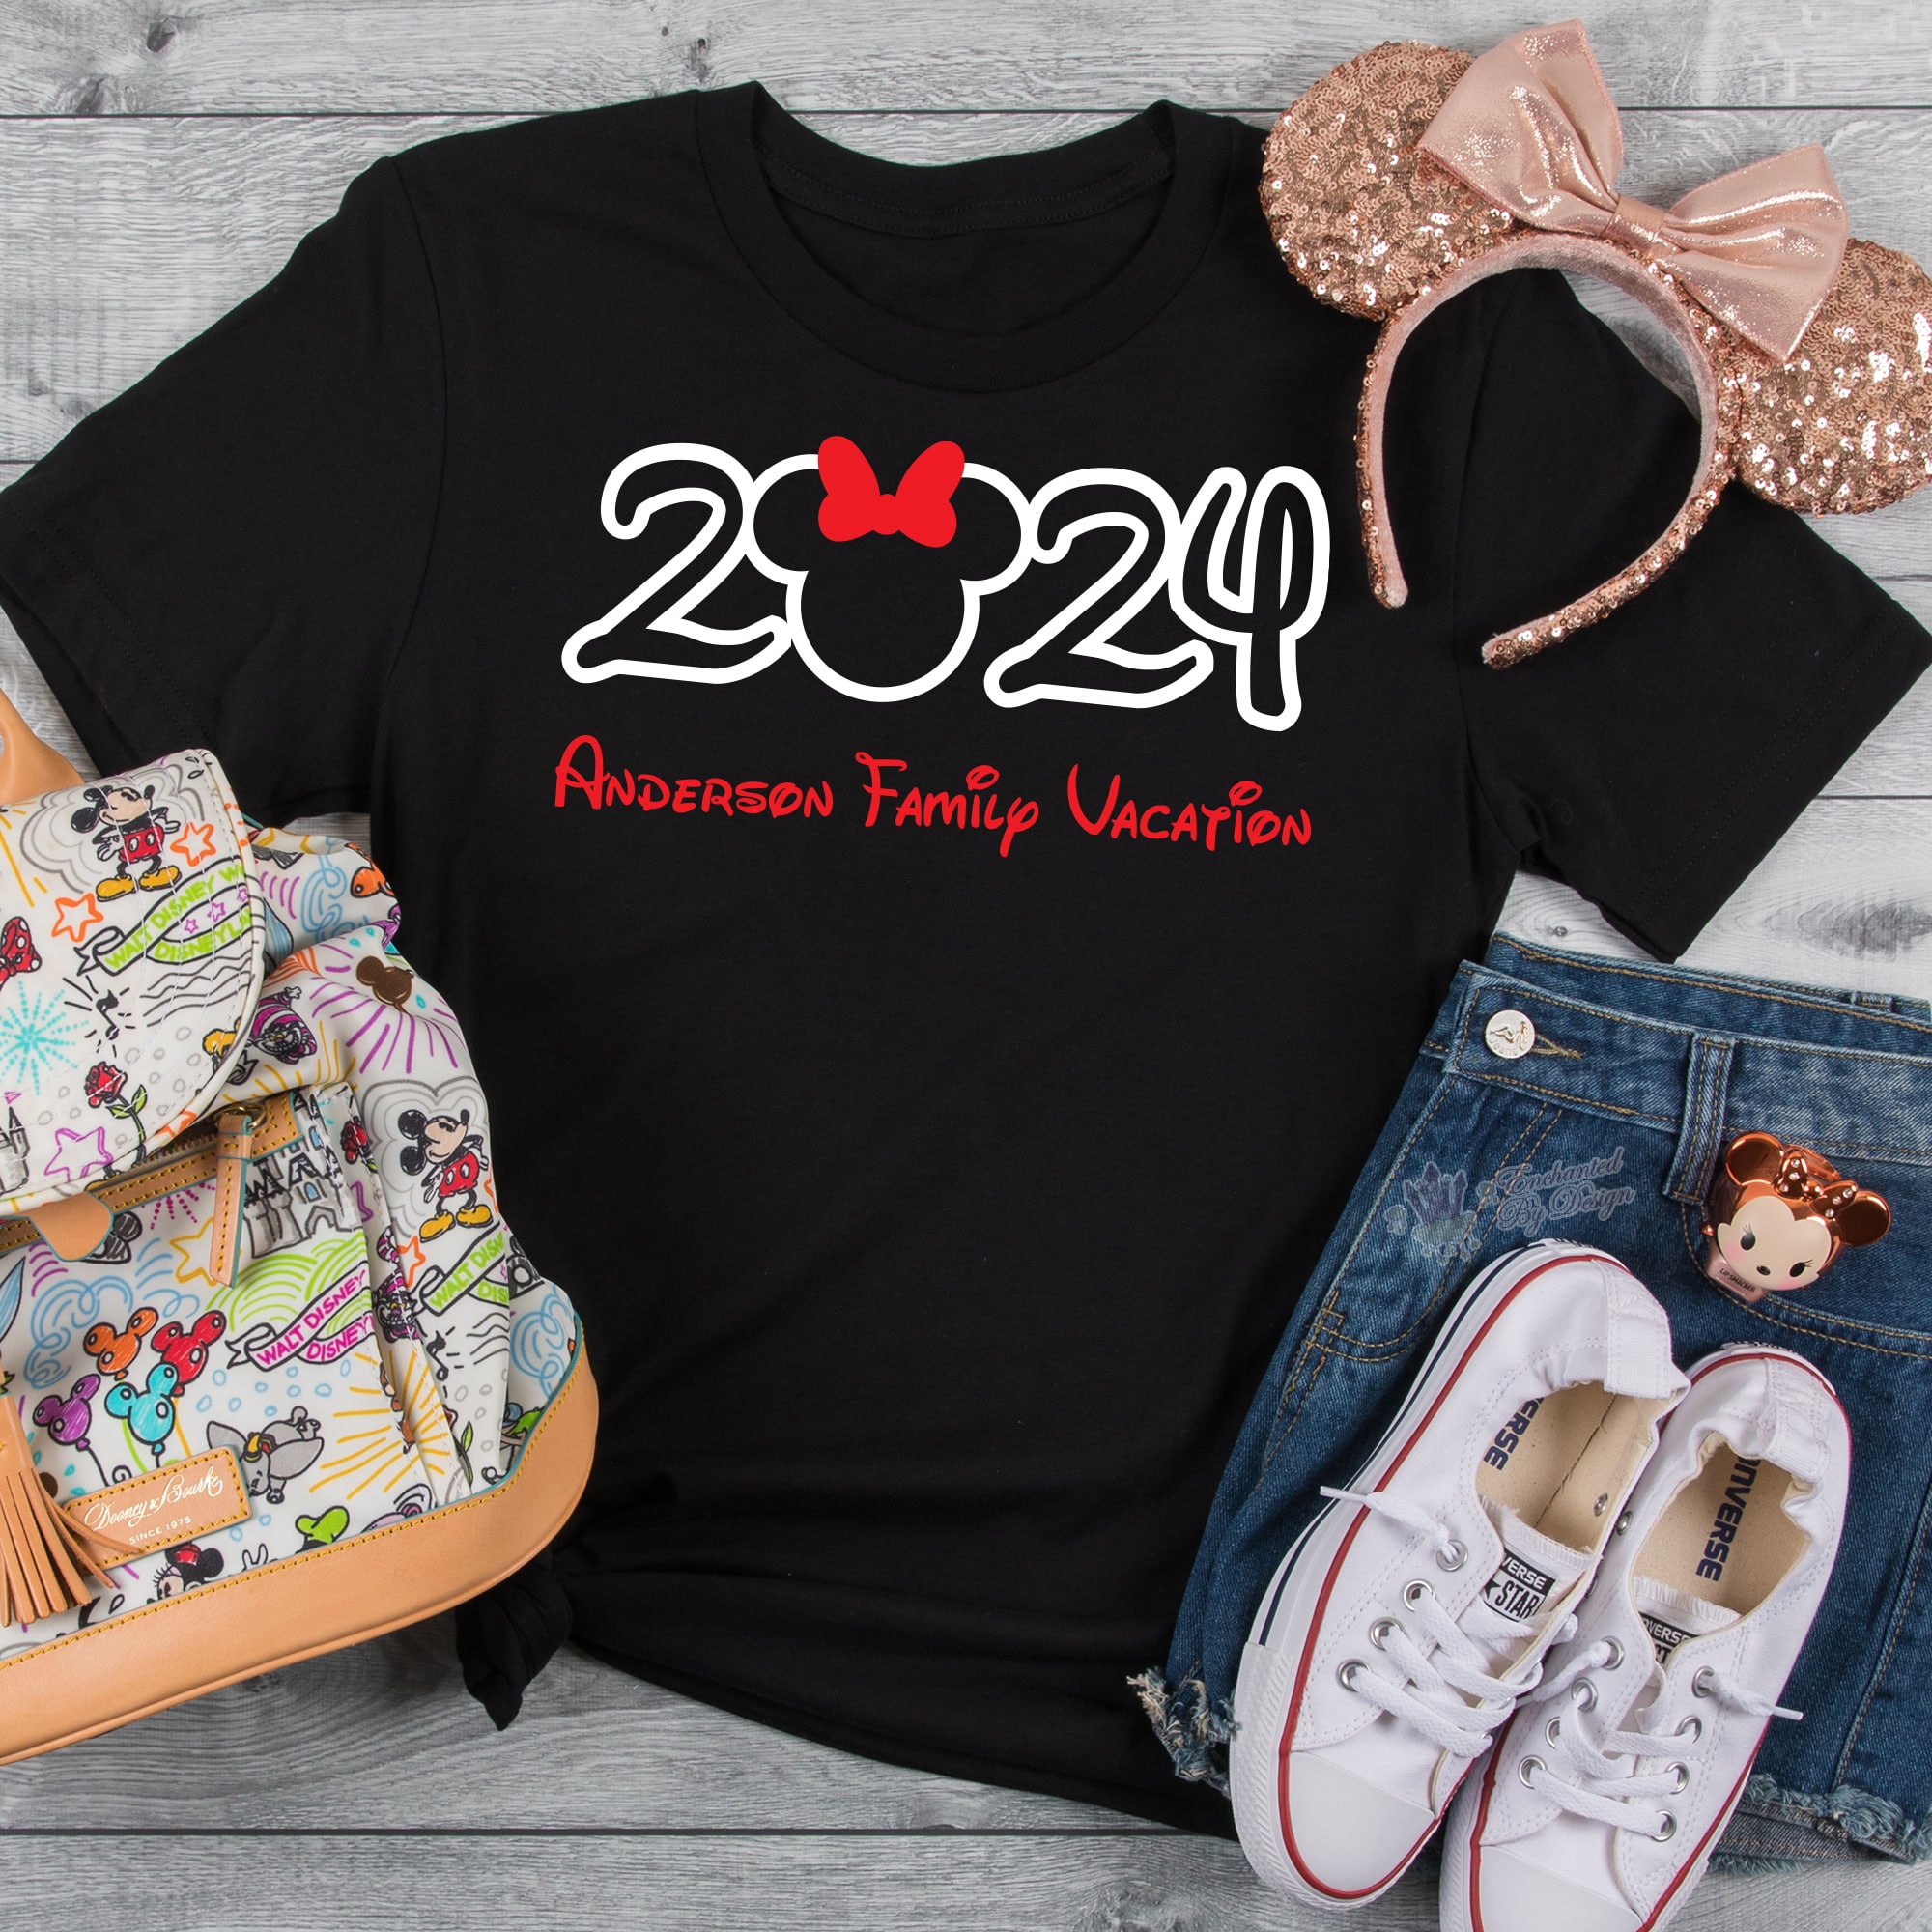 2024 Disney Cruise Line FAMILY VACATION T-SHIRTS DISNEY ALL SIZES & COLORS